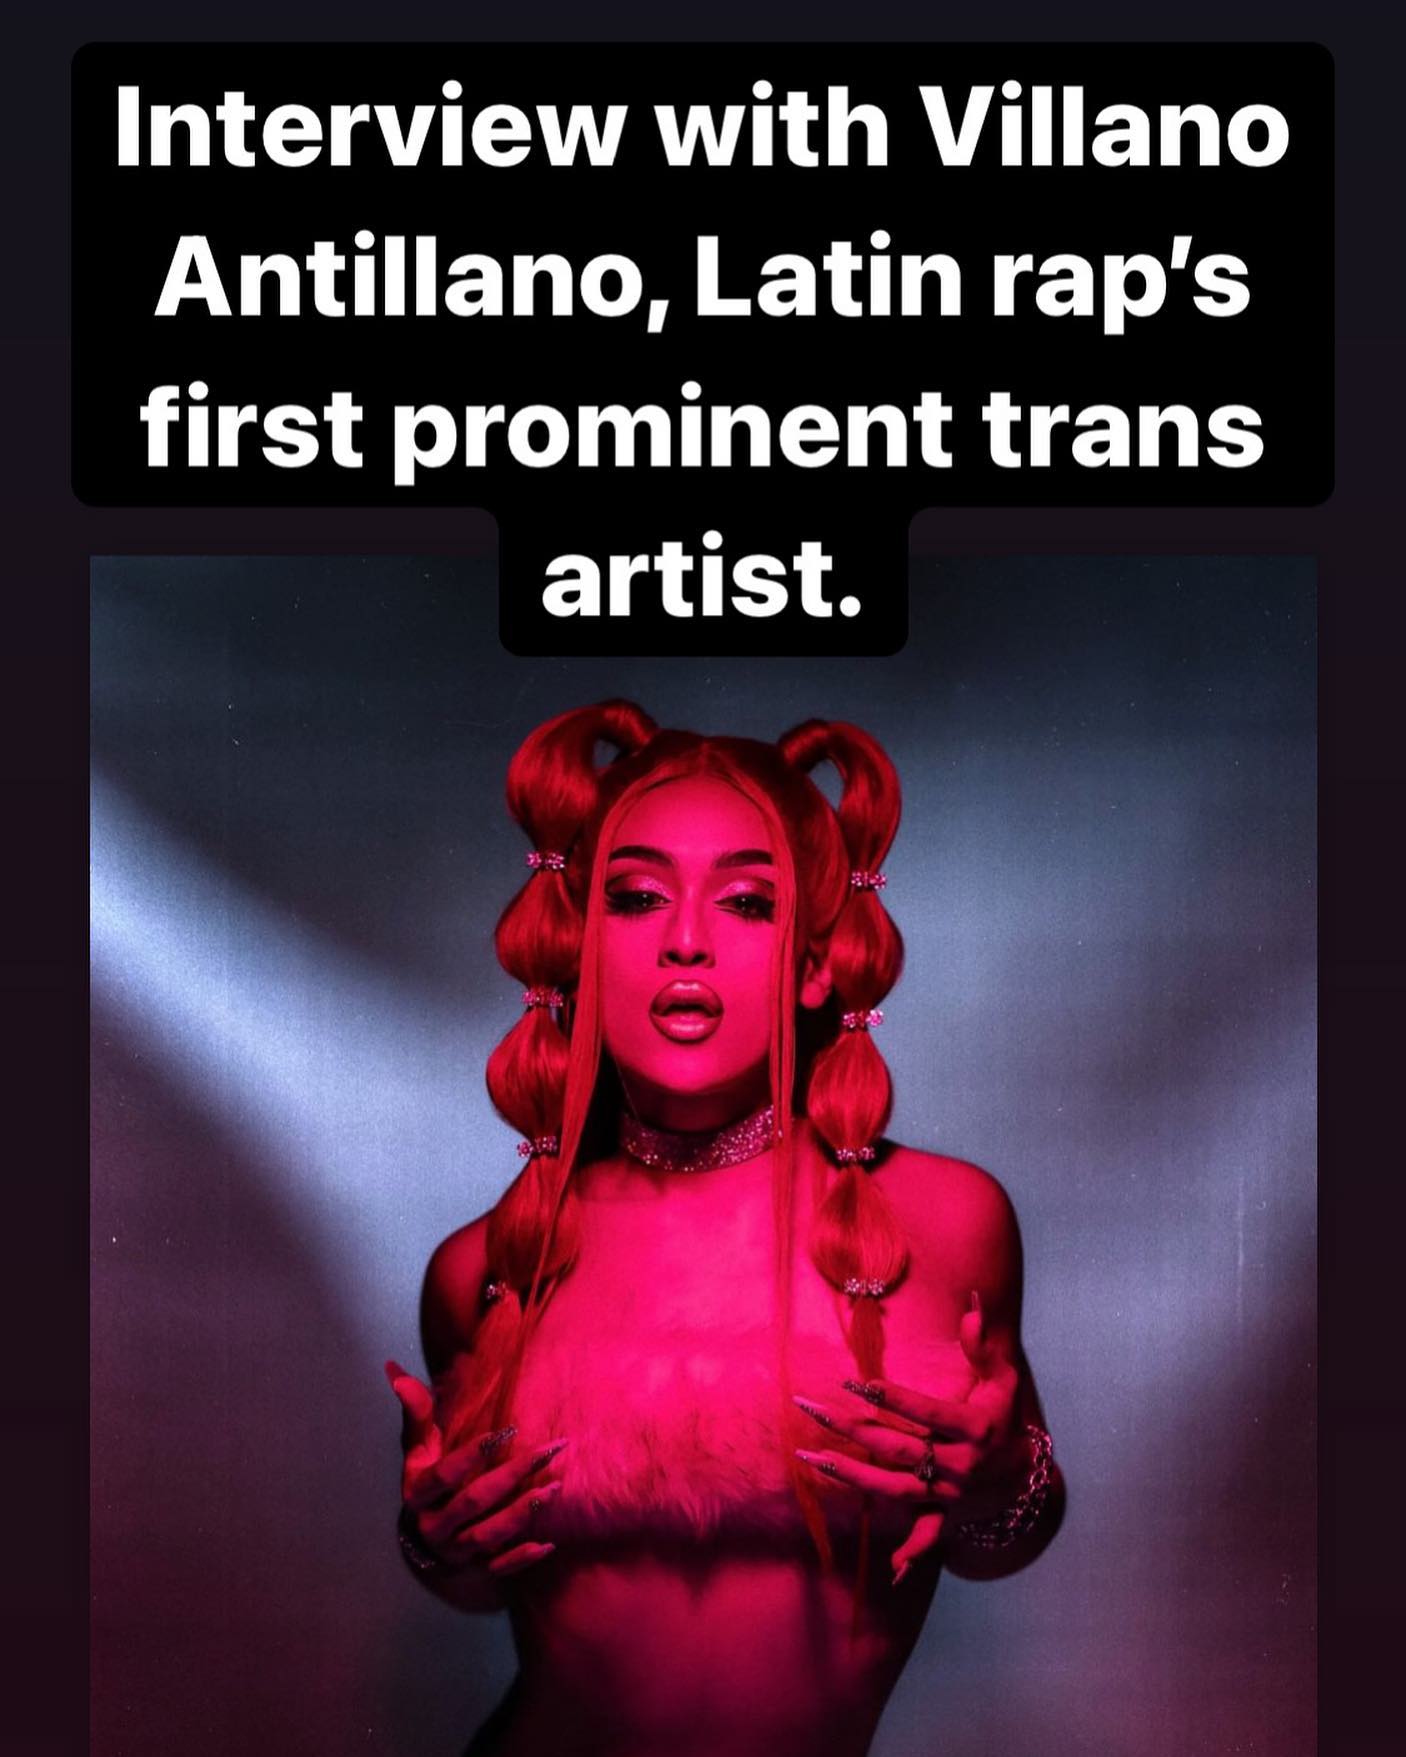 Interview with @villanoantillano. Via @rollingstone Link to story in English: https://www.rollingstone.com/music/music-features/villano-antillano-1388154/amp/

#latinrap #latinmusic #villanoantillano #transartist